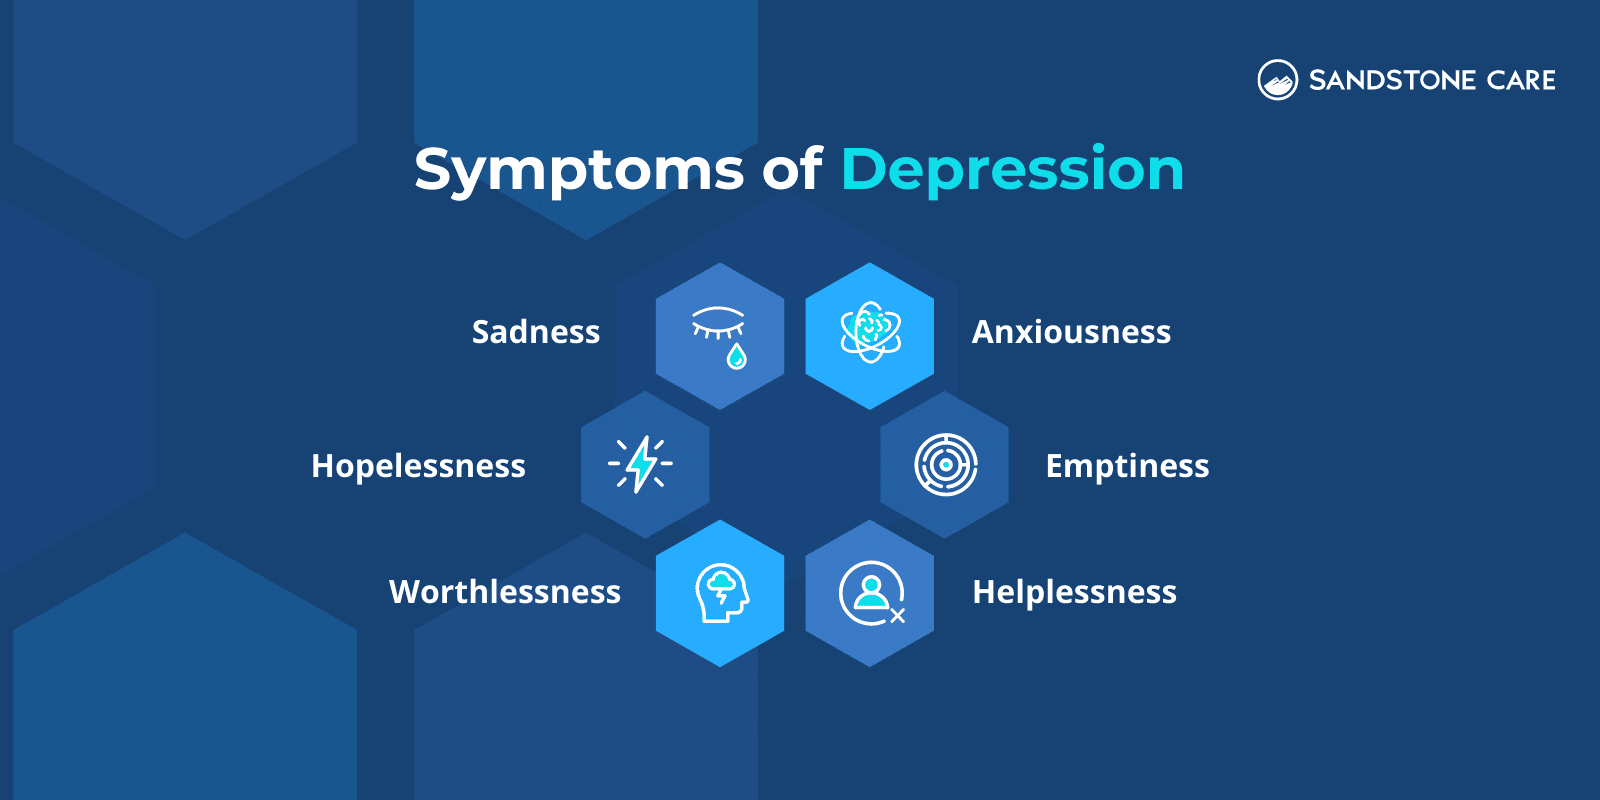 6 Symptoms of Depression illustrated with relevant icons